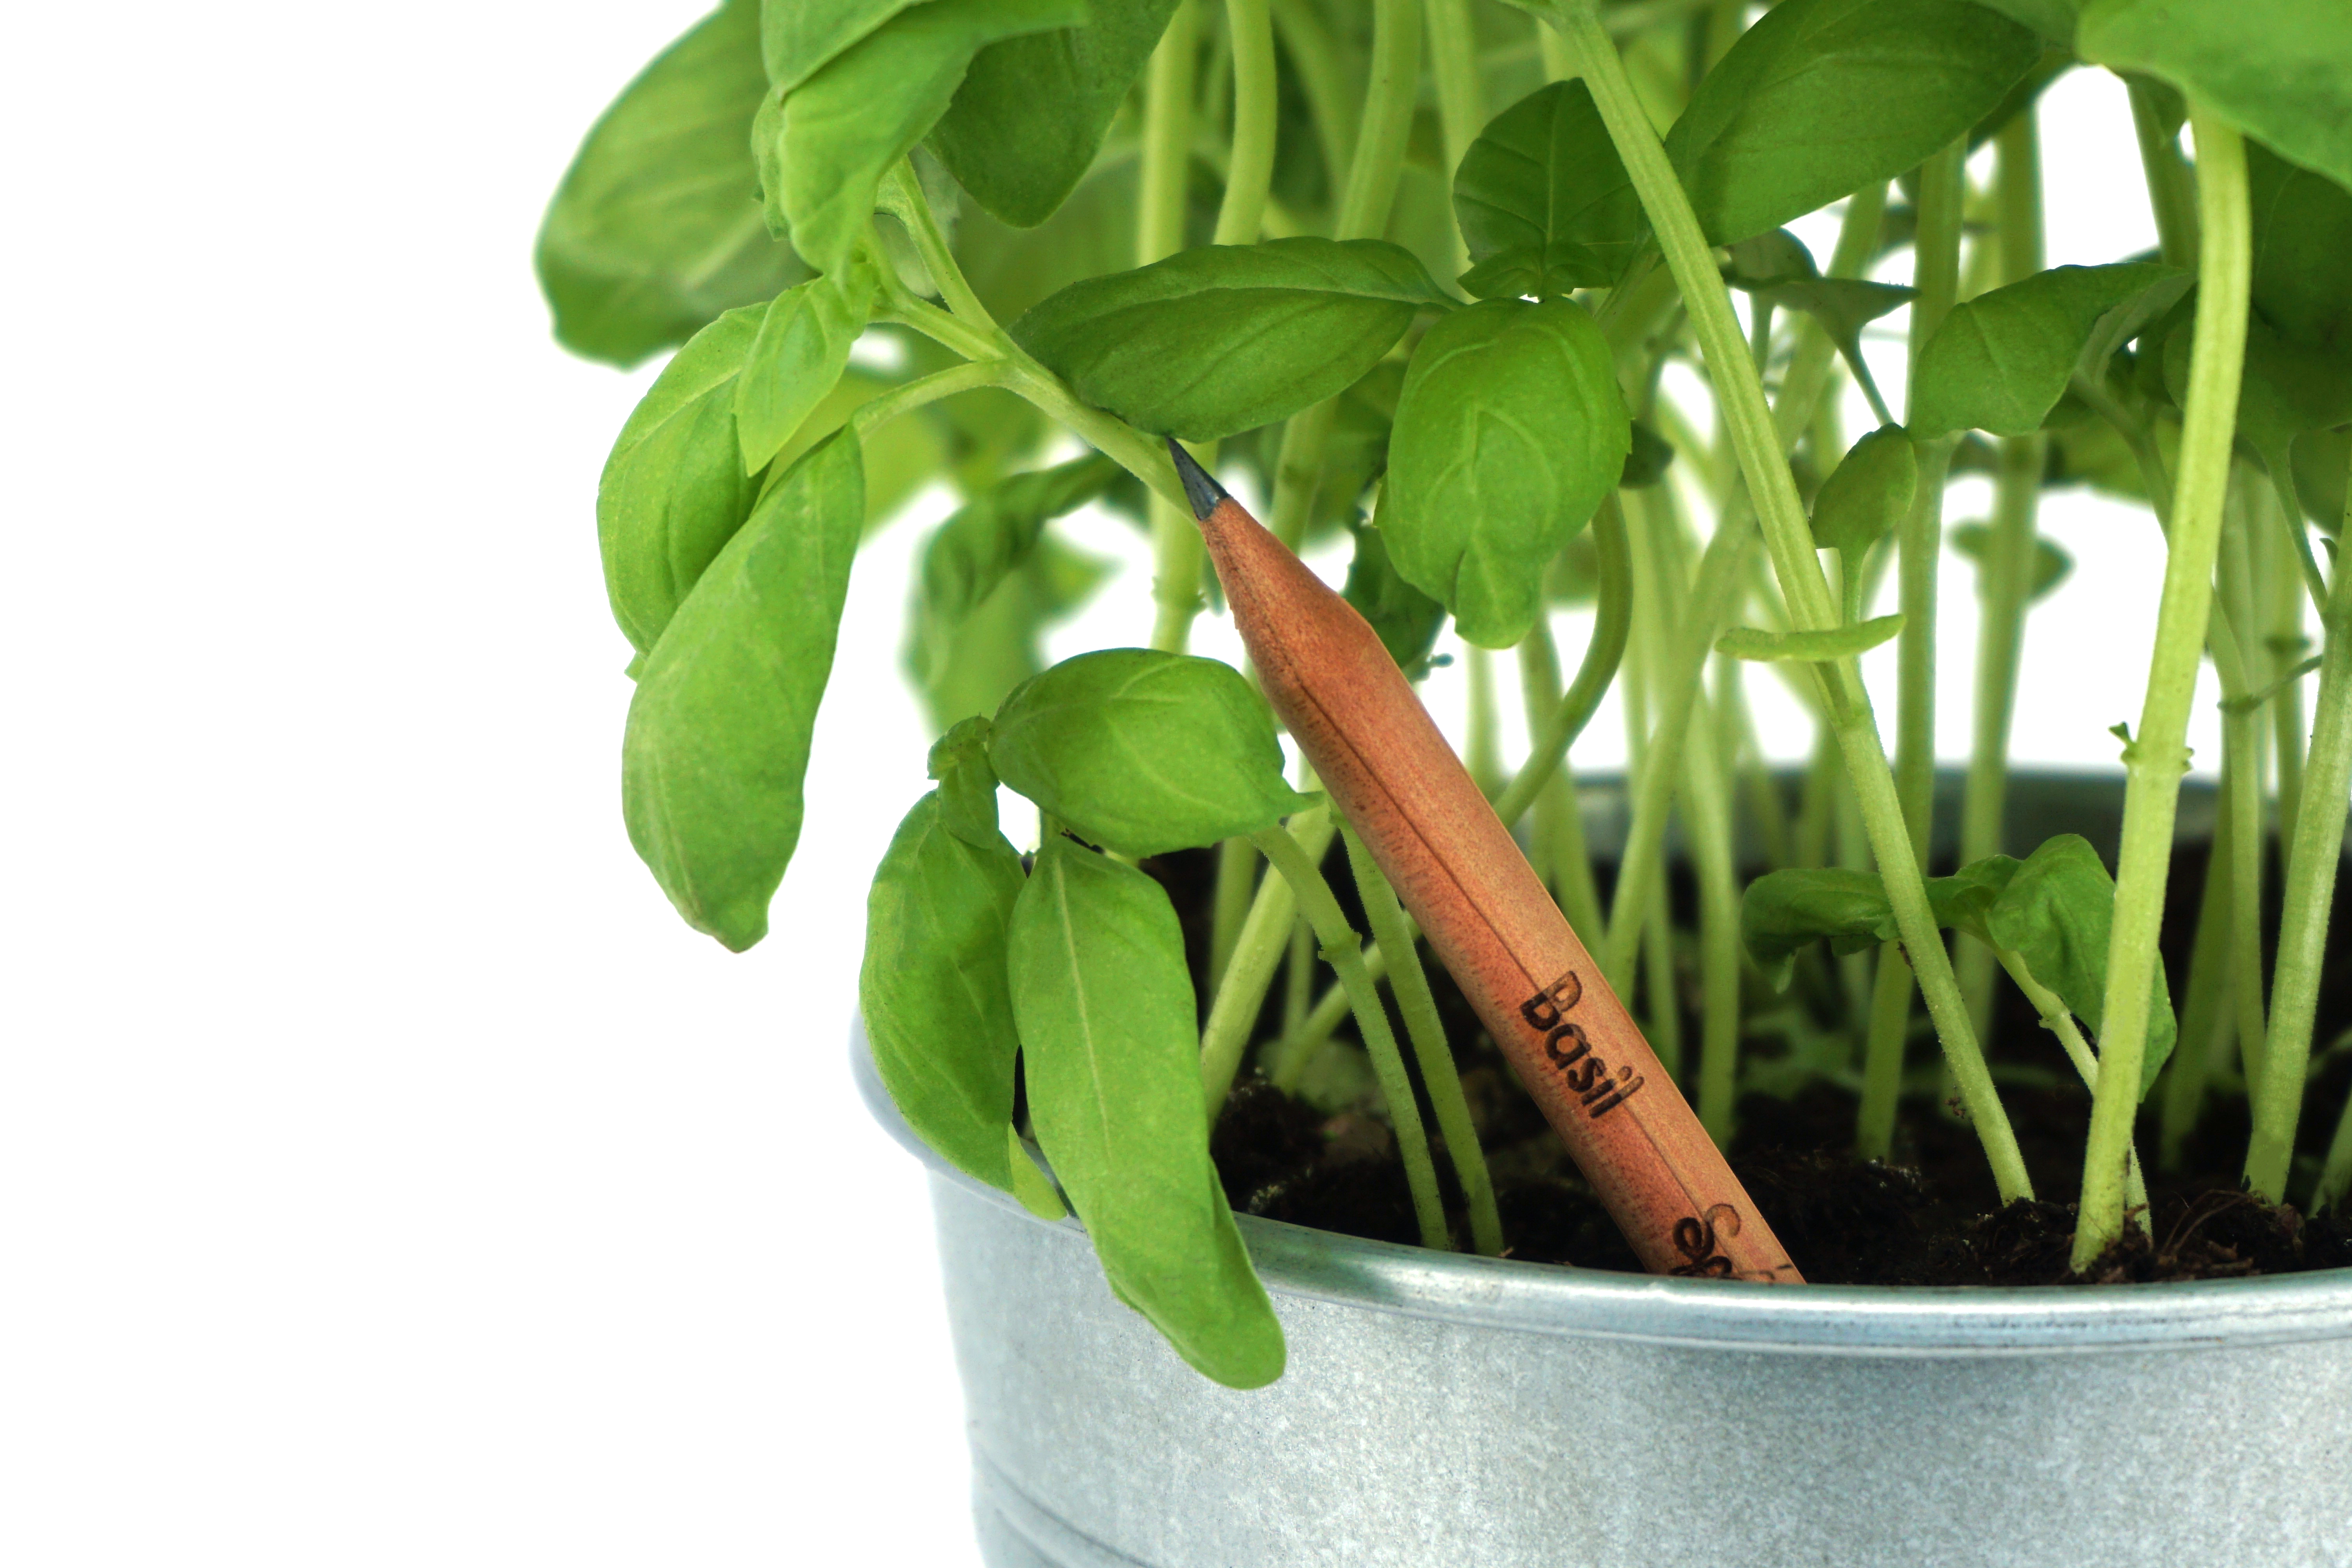 Pencil inserted into pot with basil plants sprouting.